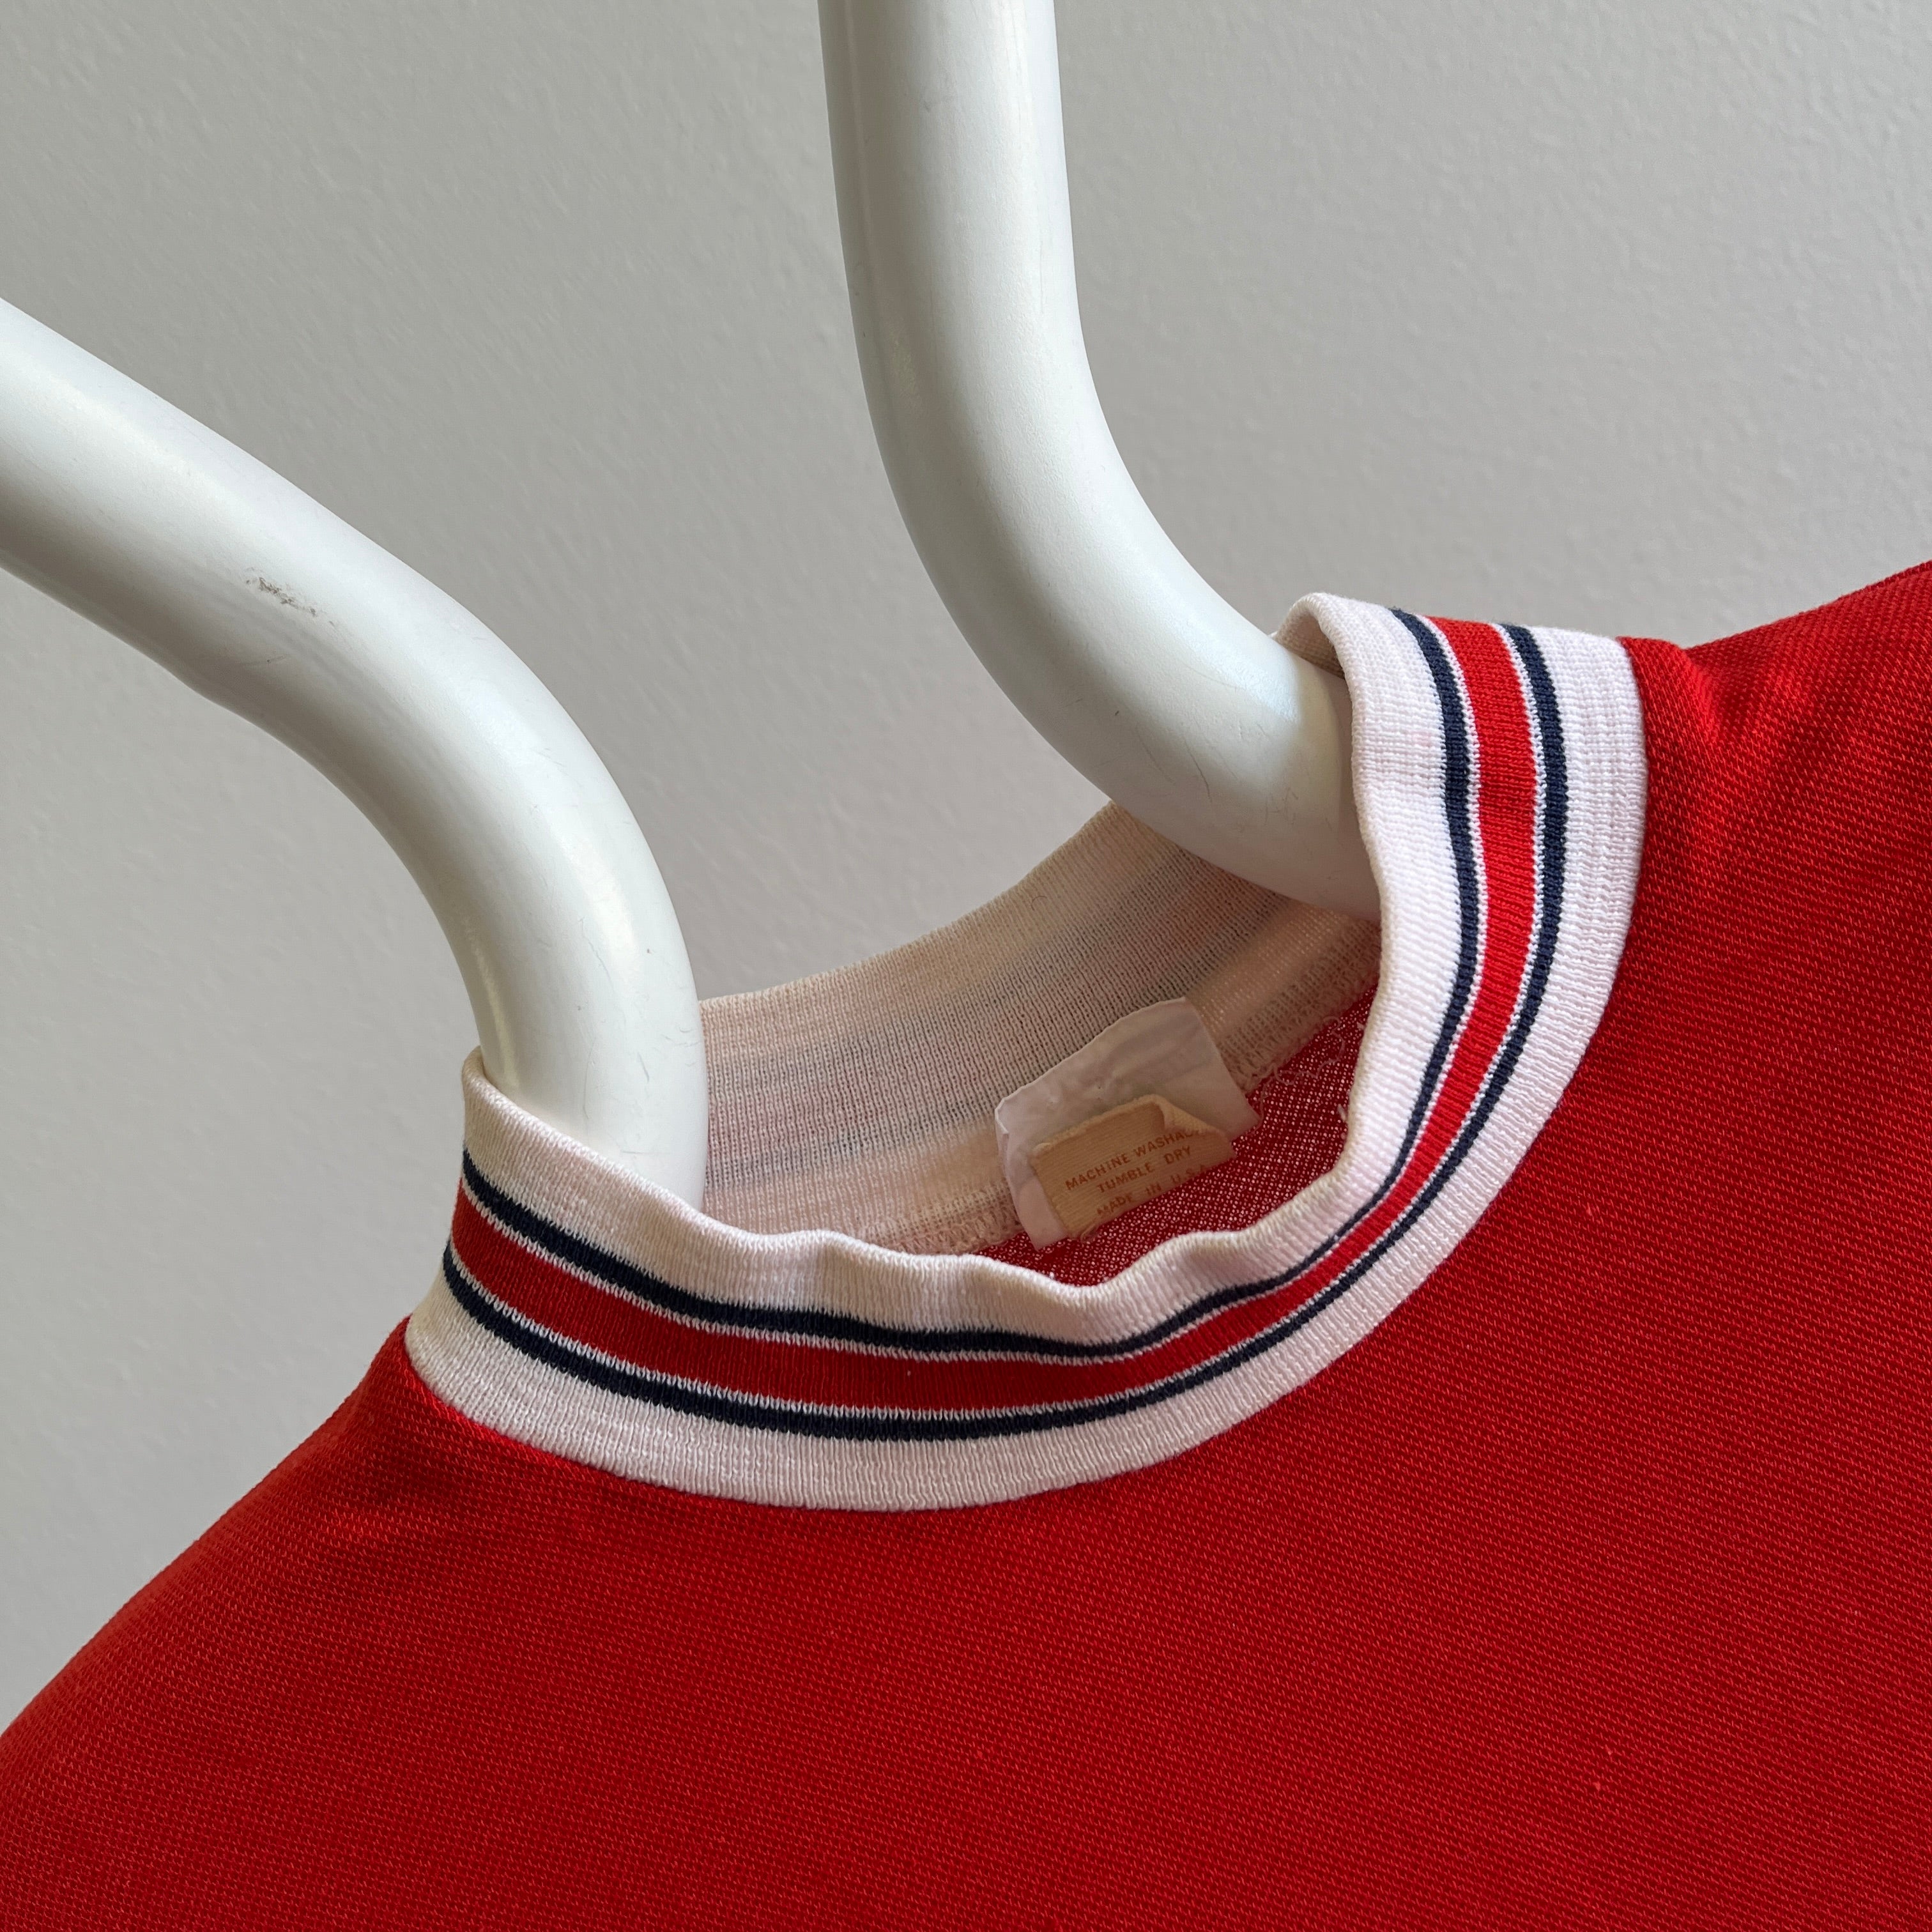 GG Penguin Grand Slam Red Mock Neck T-Shirt with Contrast Collar - WOWOW!